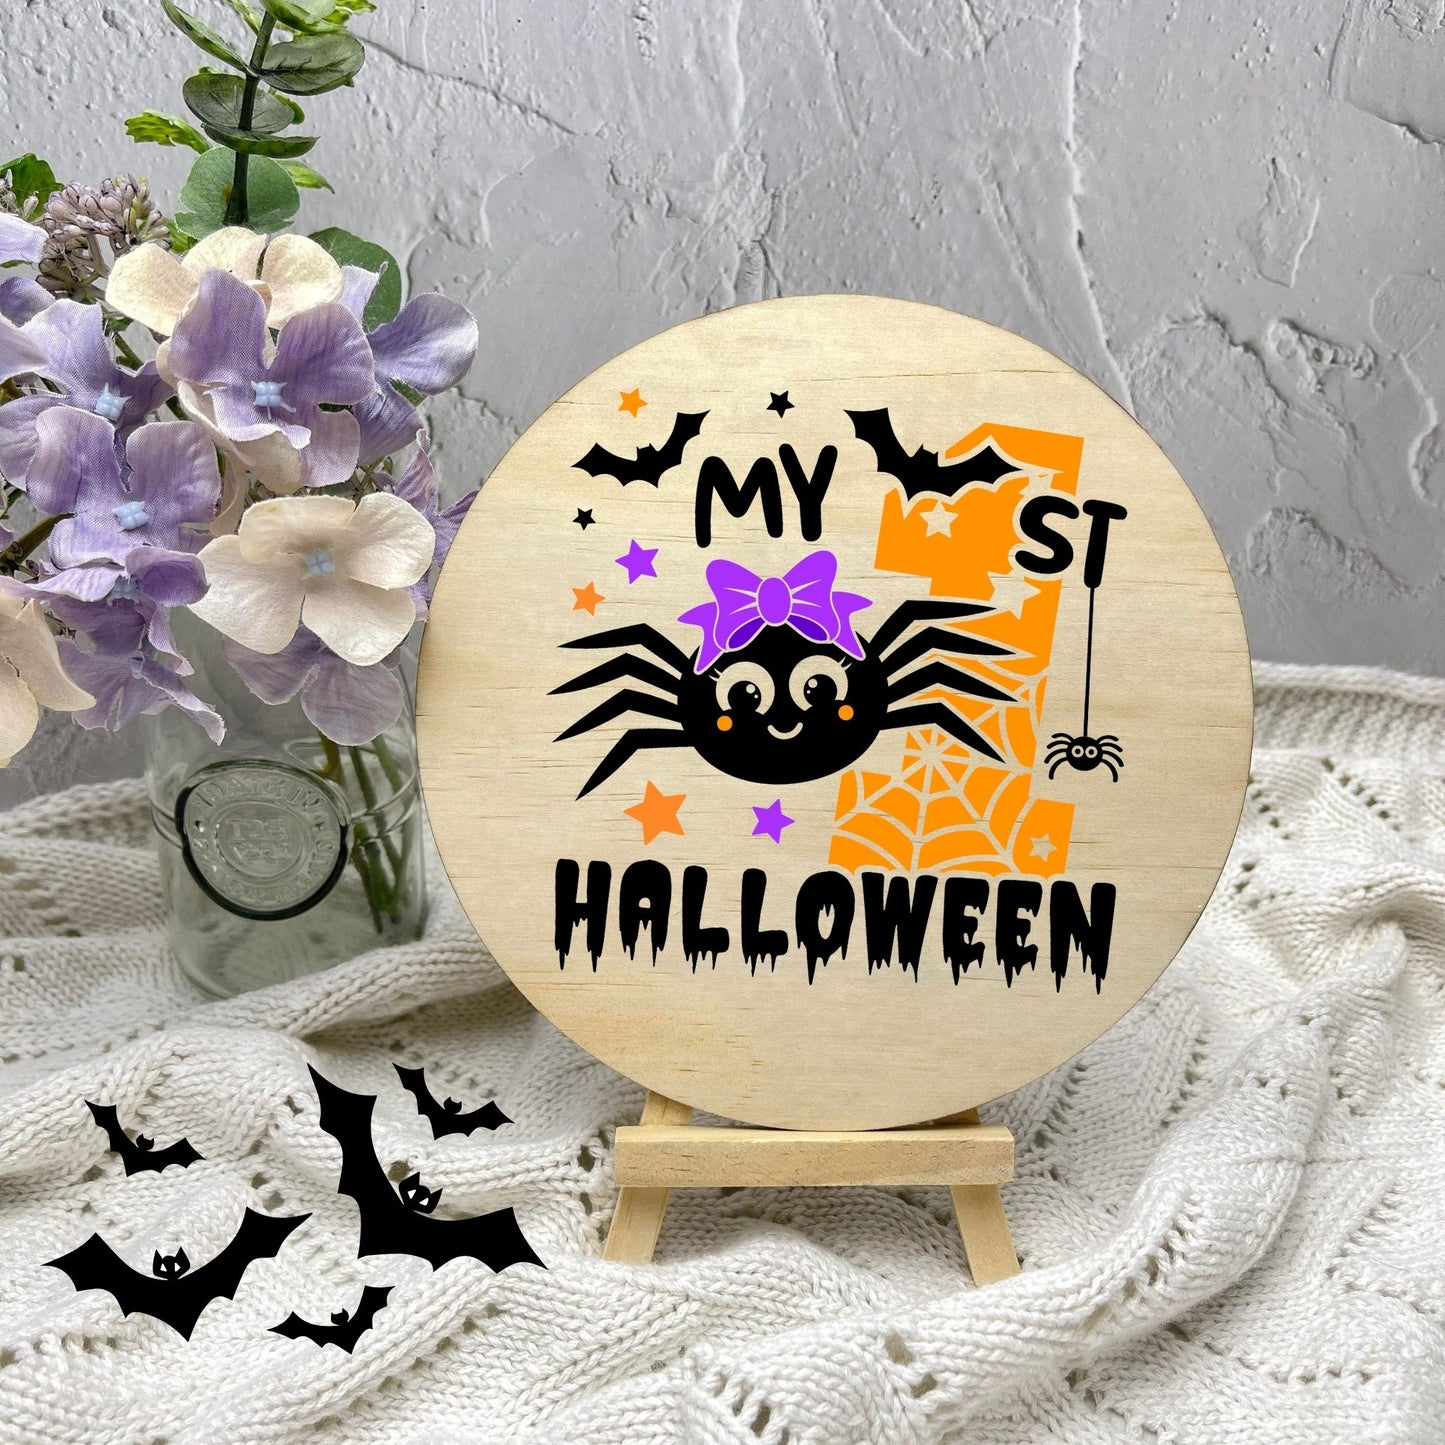 My first Halloween sign, Halloween Decor, Spooky Vibes, hocus pocus sign, trick or treat decor, haunted house h7